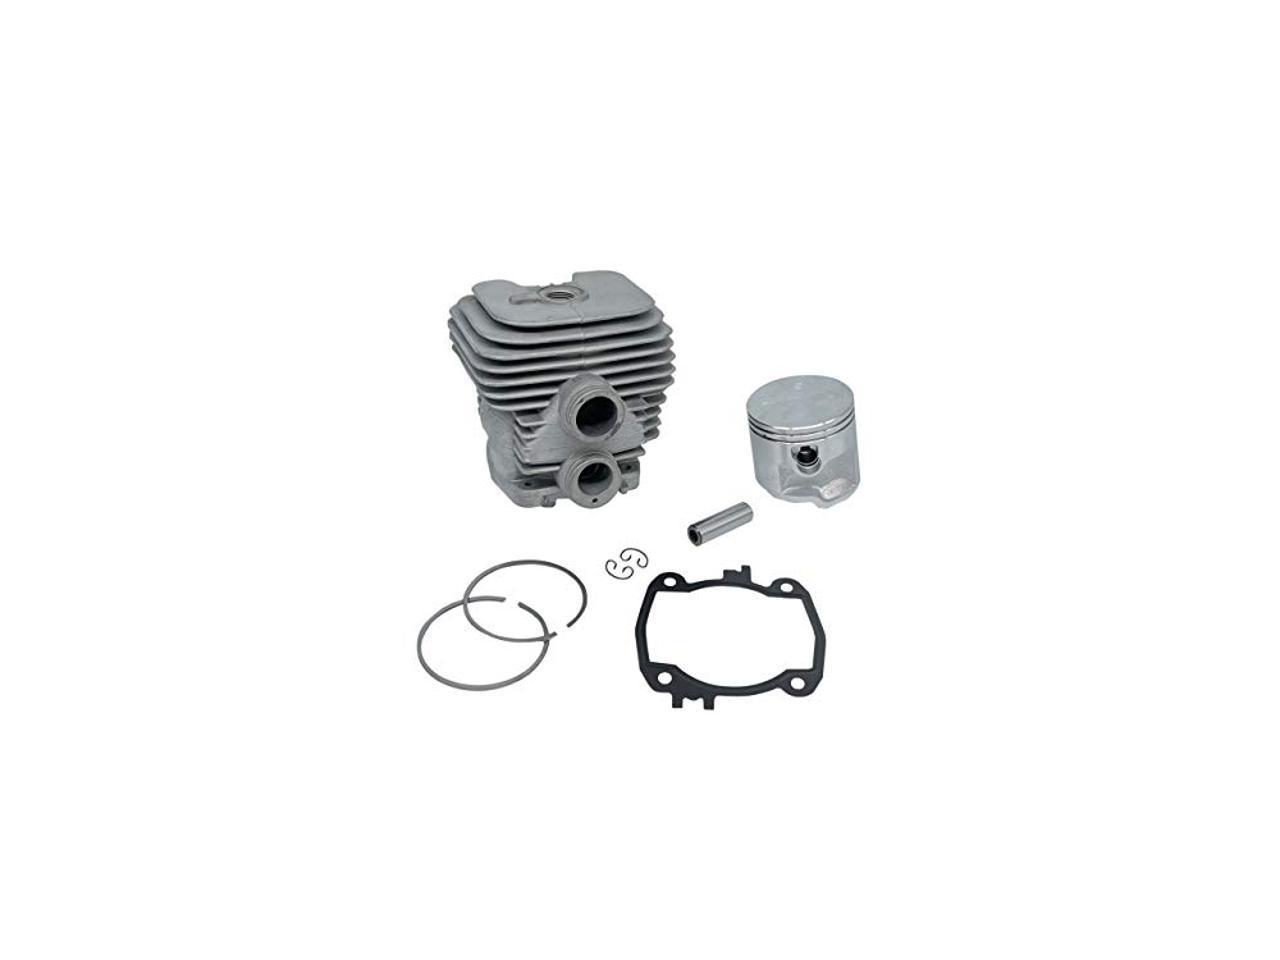 Durable 50mm Cylinder Piston Gaskets Kit For Stihl TS410 TS420 Cut-Off Saw 